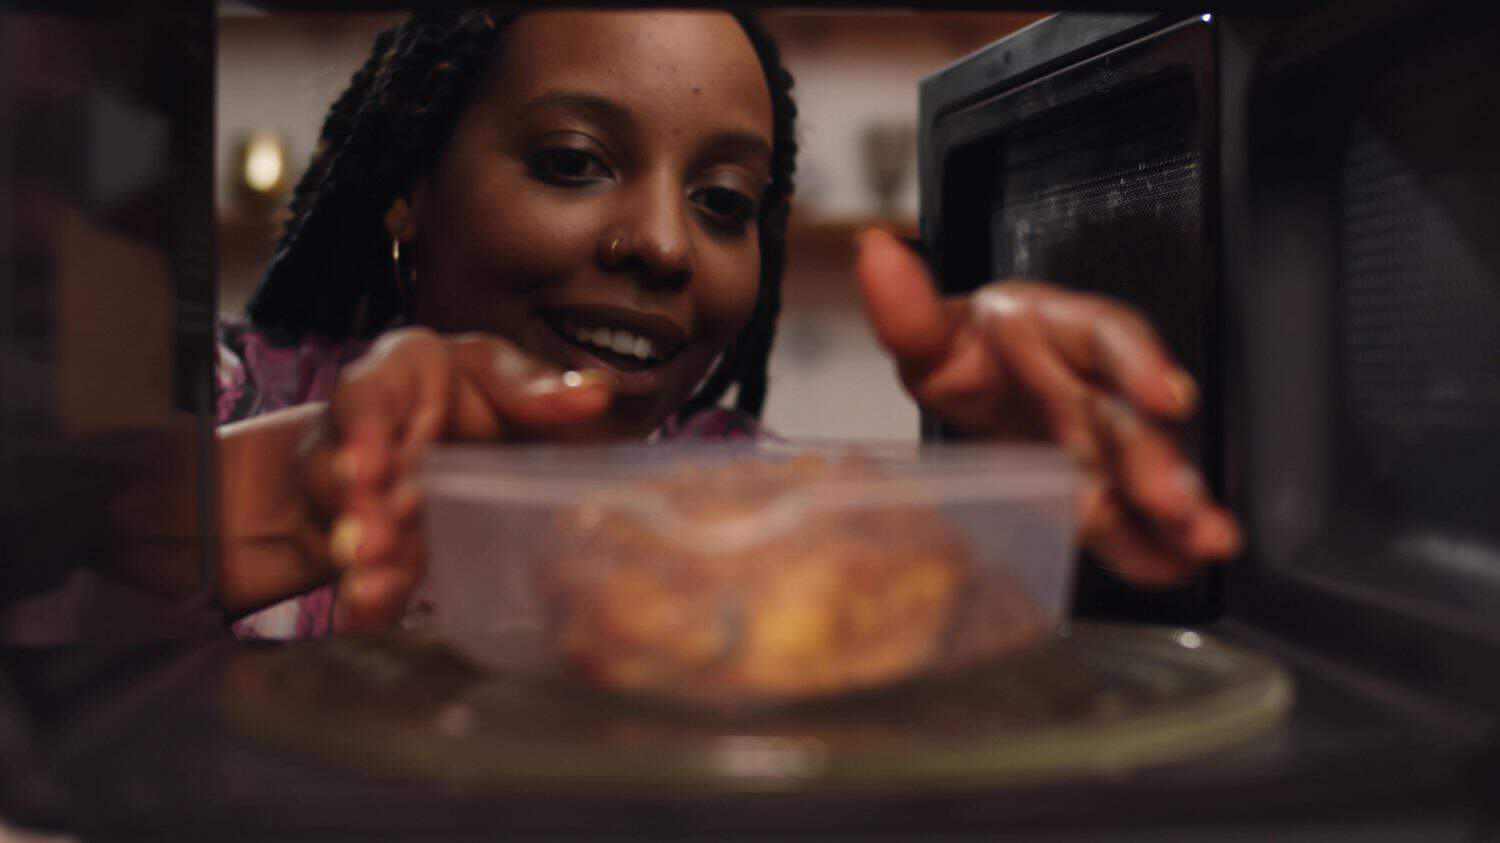 Woman using the microwave oven to heat food